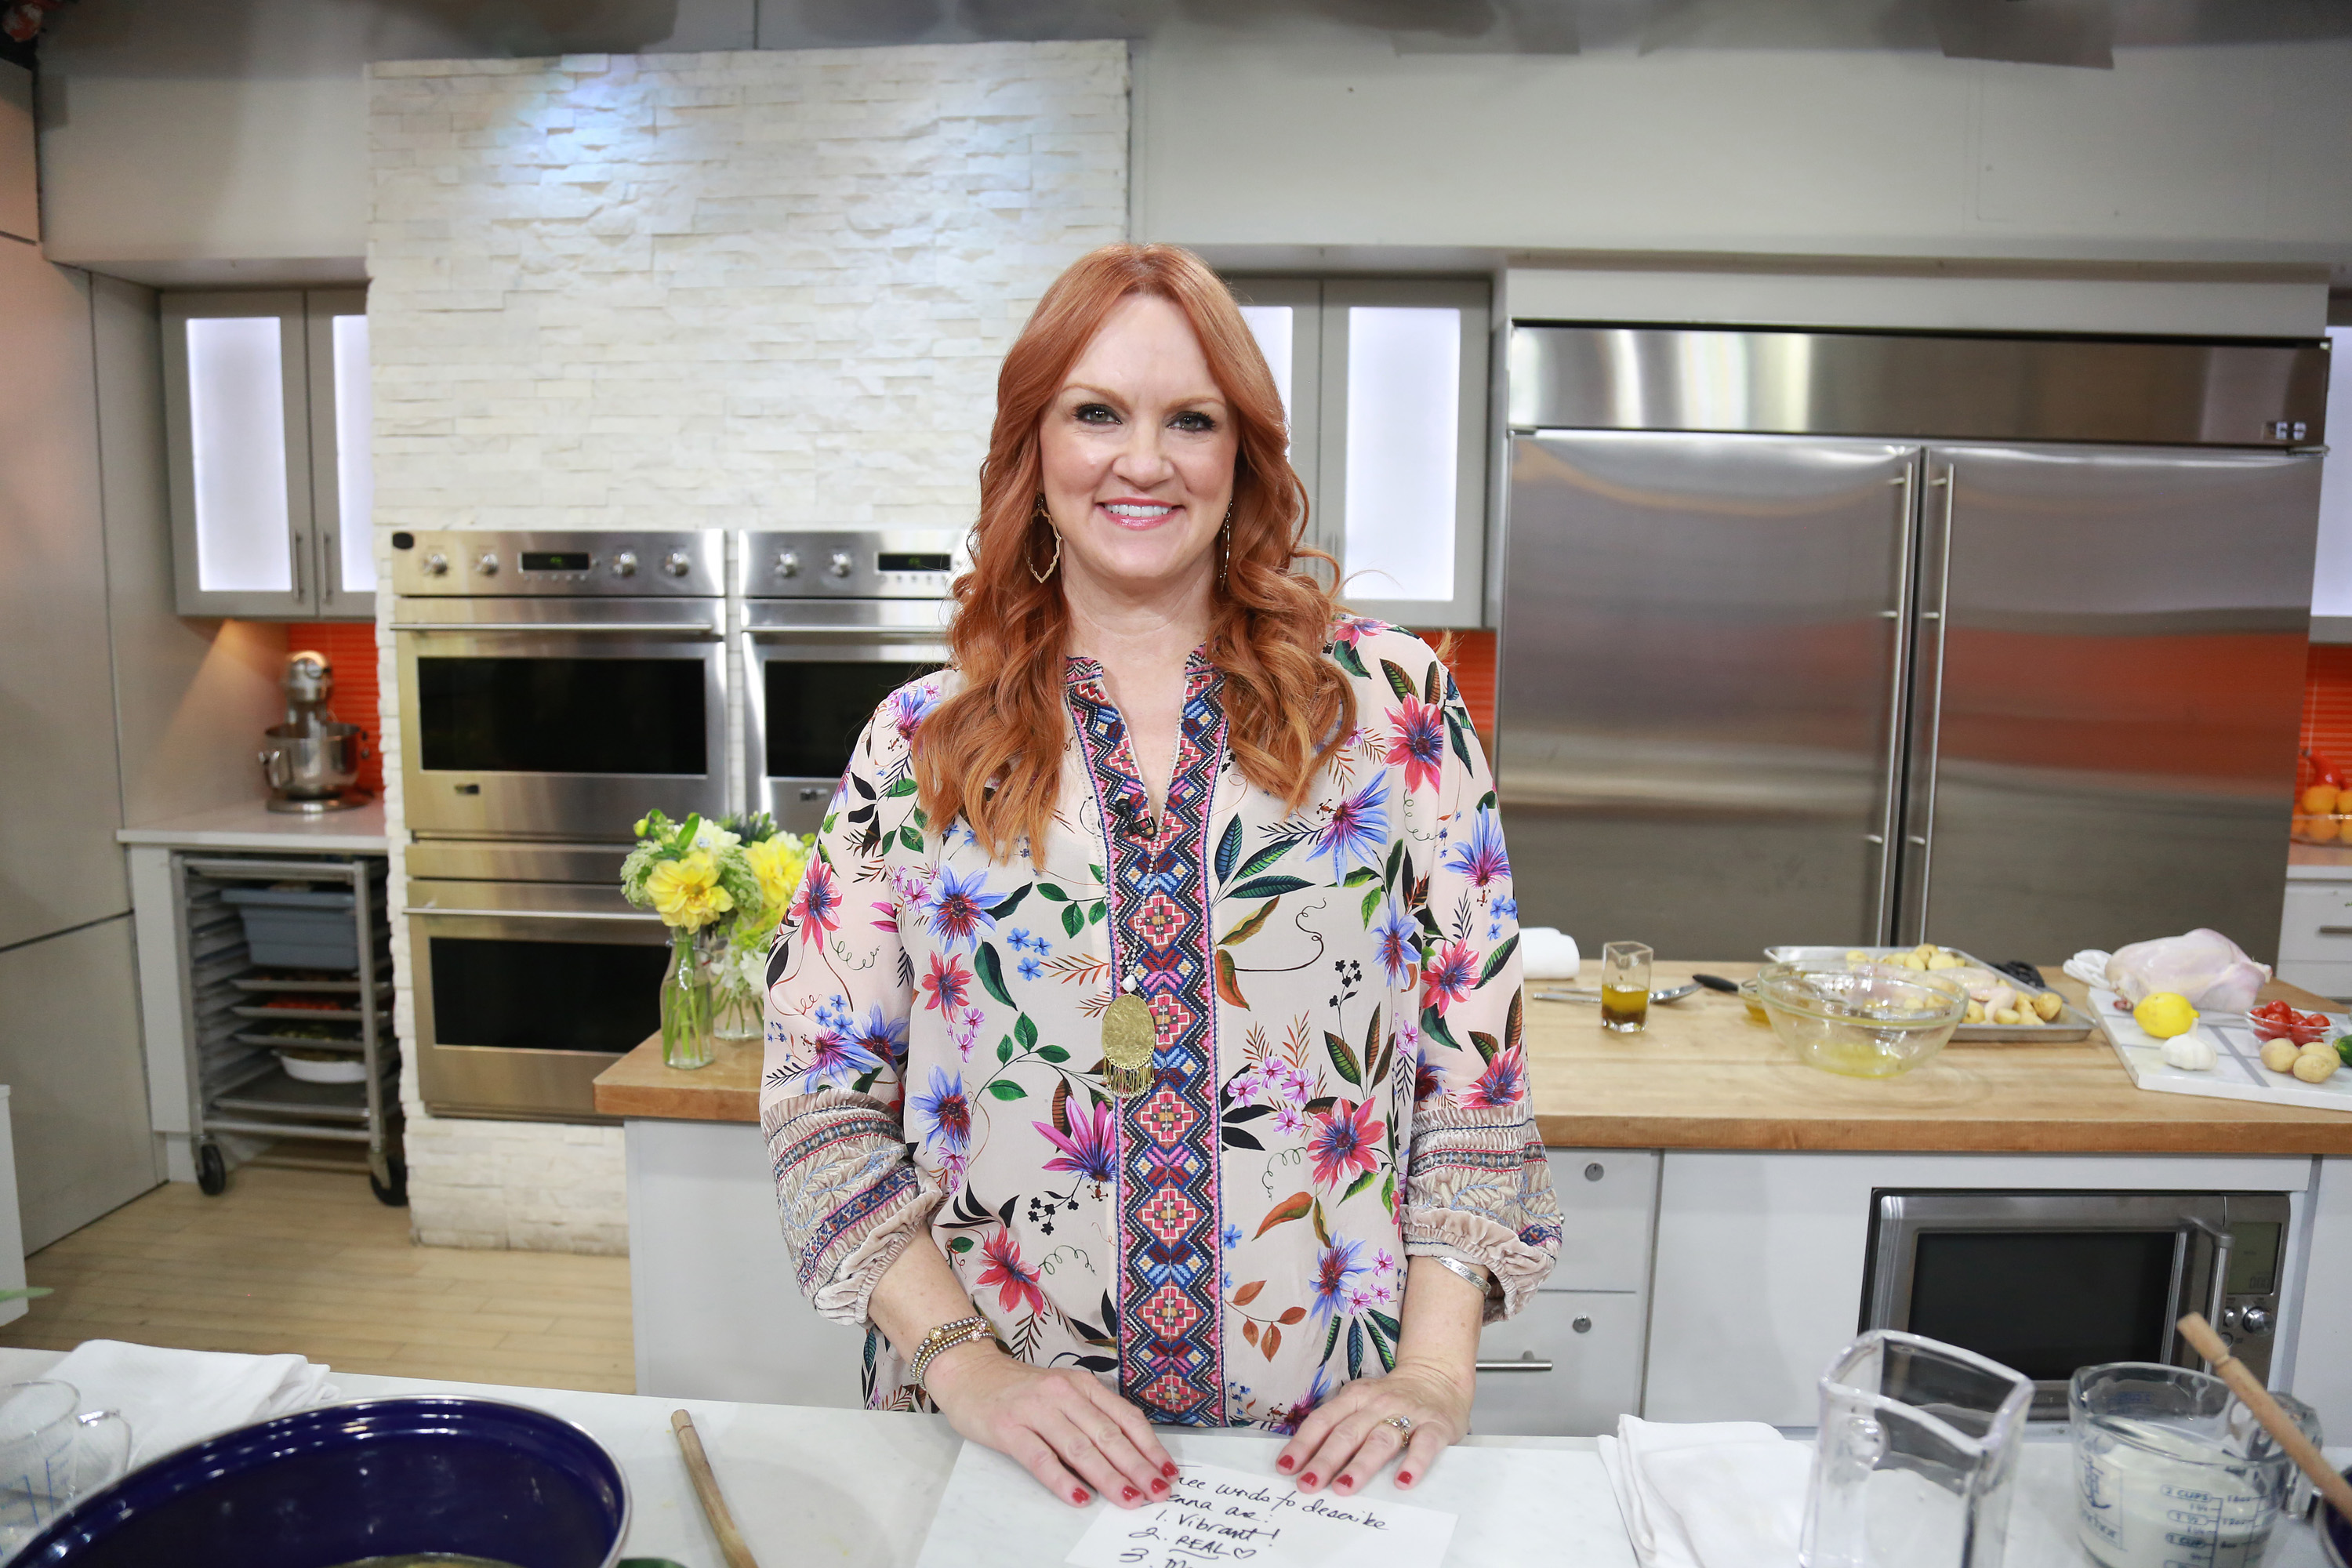 Ree Drummond stands at a counter and smiles during an appearance on the 'Today' show in 2019